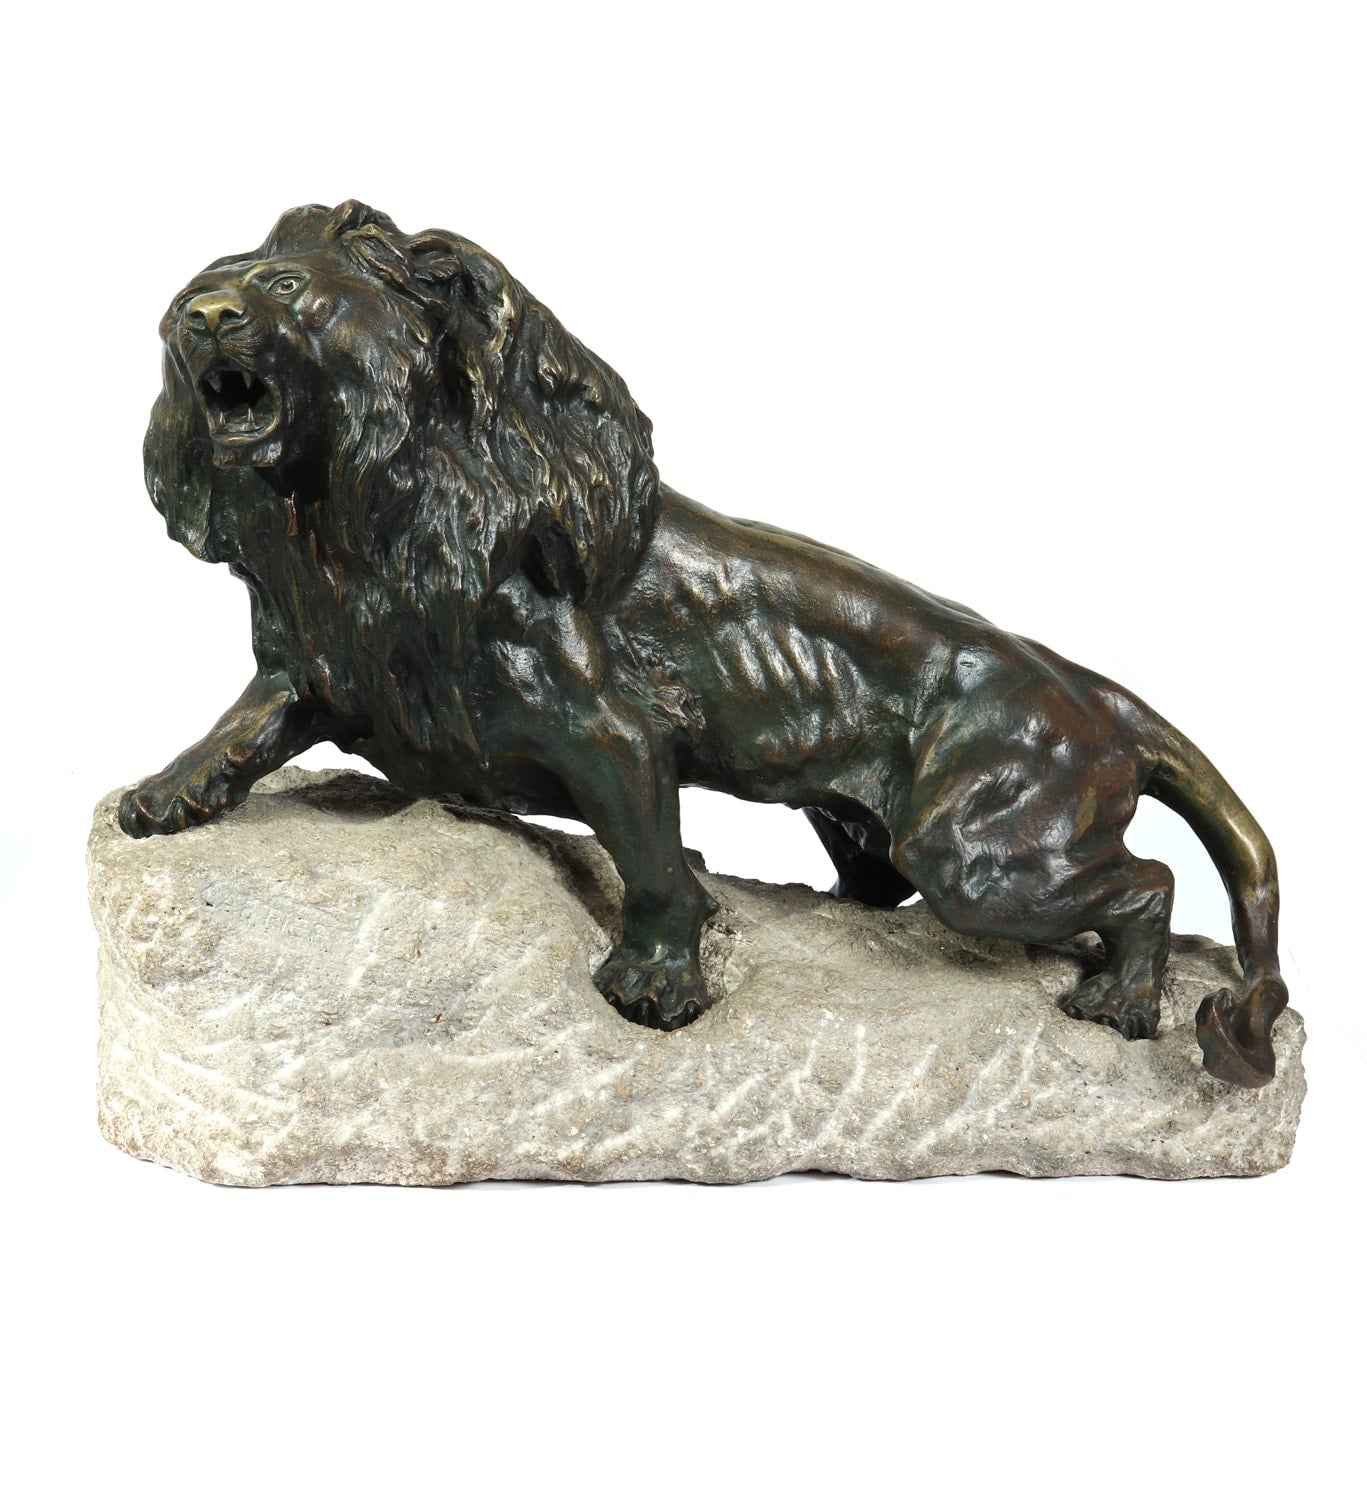 Large Bronze Lion on a Rock by Cartier c1920